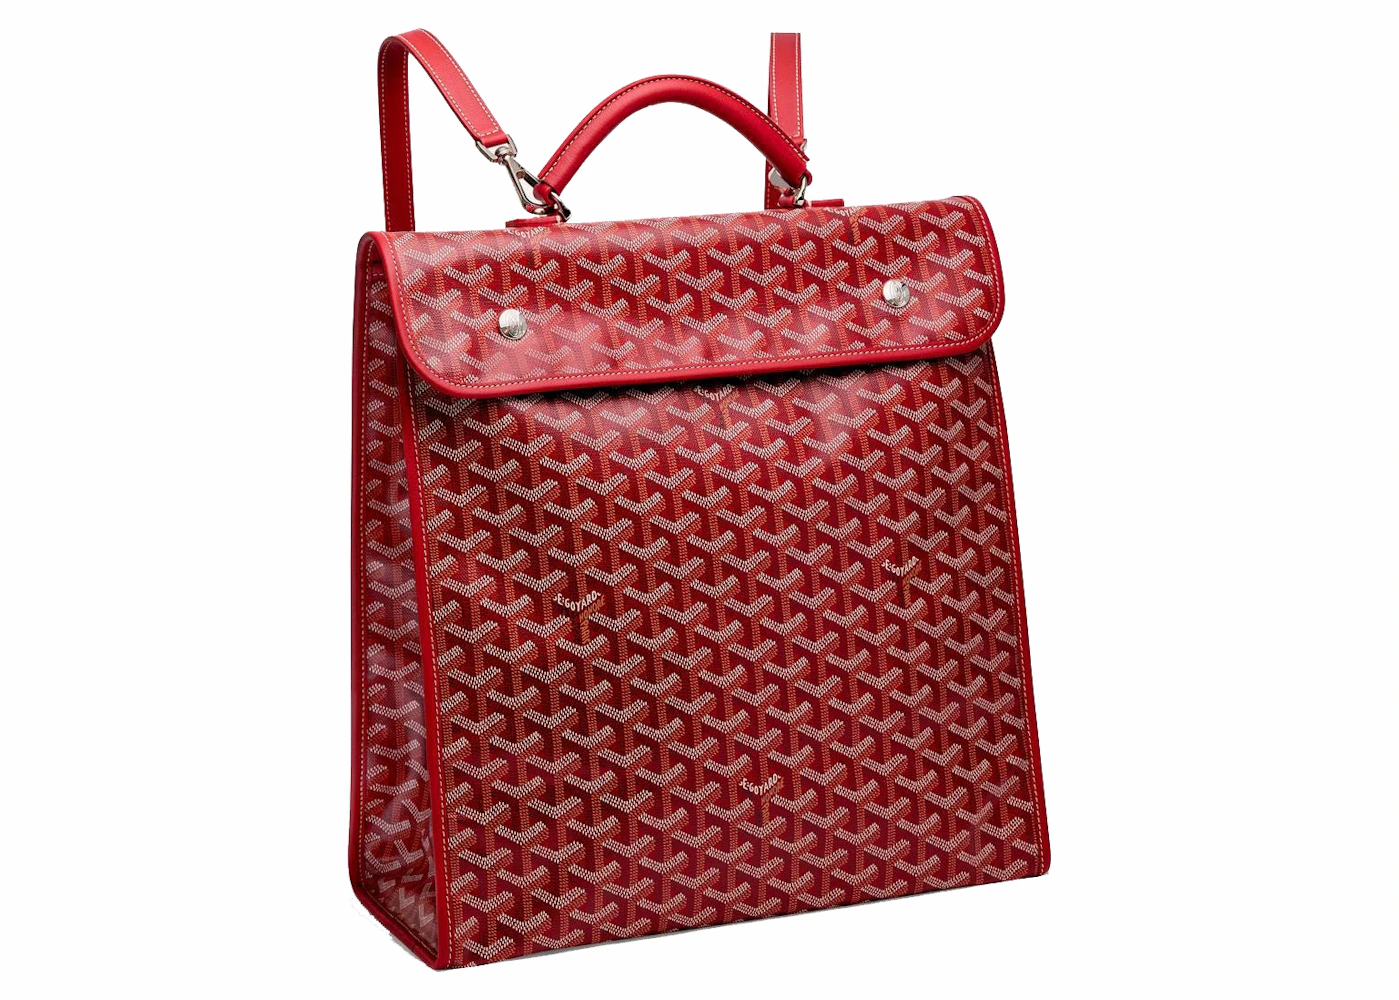 Goyard Saint Léger Backpack Red in Canvas/Calfskin Leather with